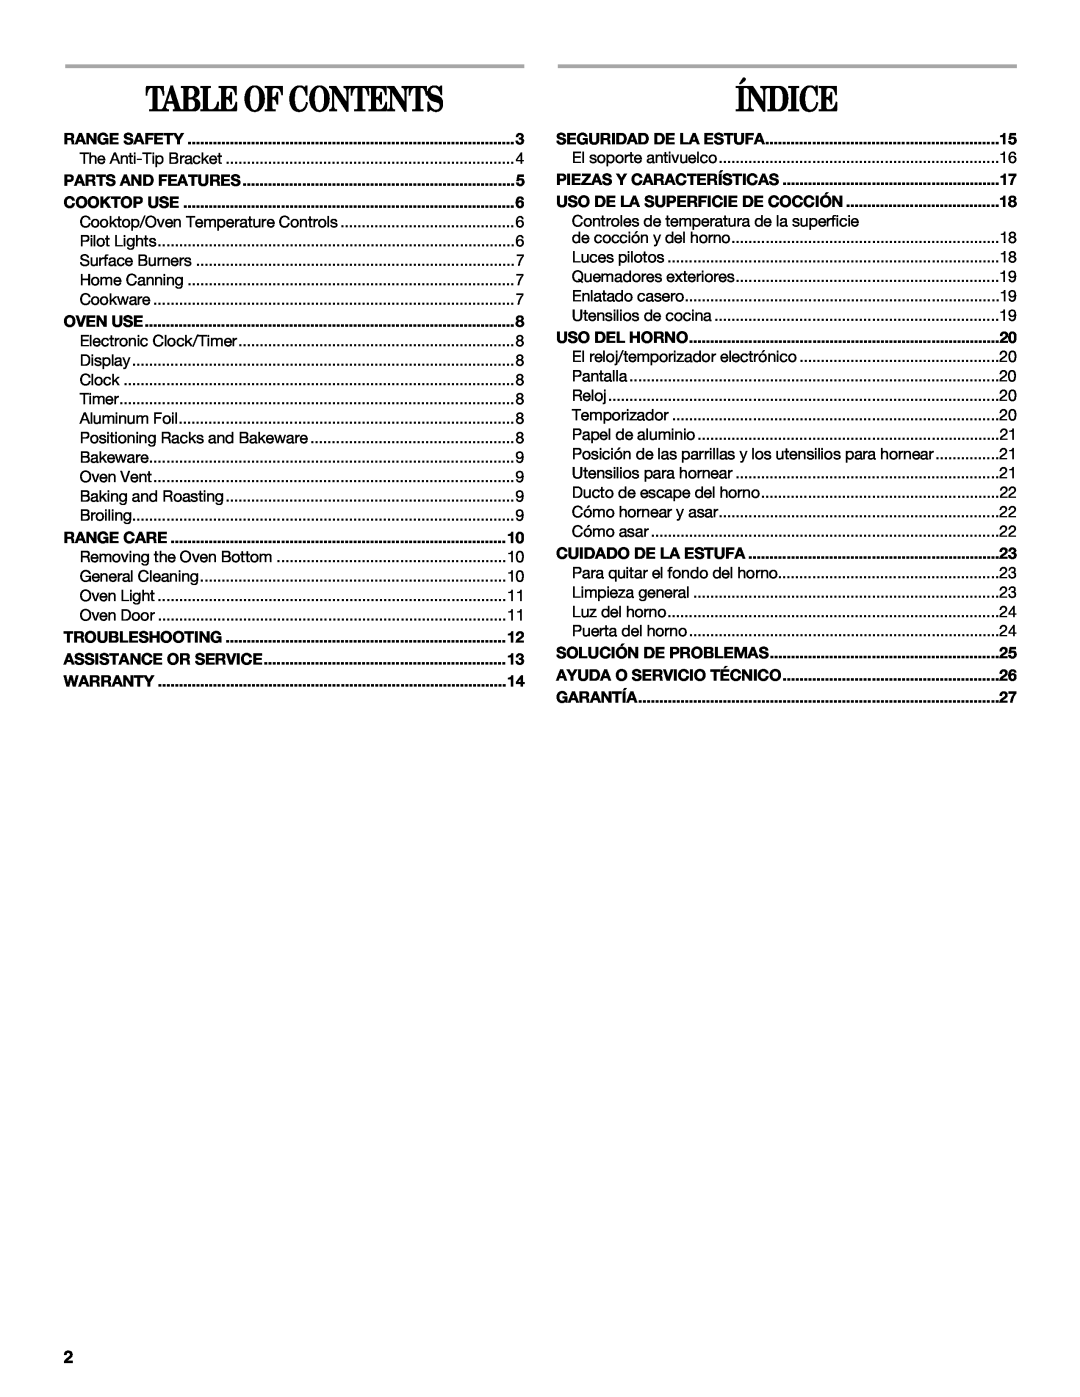 Whirlpool 98017488 manual Table Of Contents, Índice 